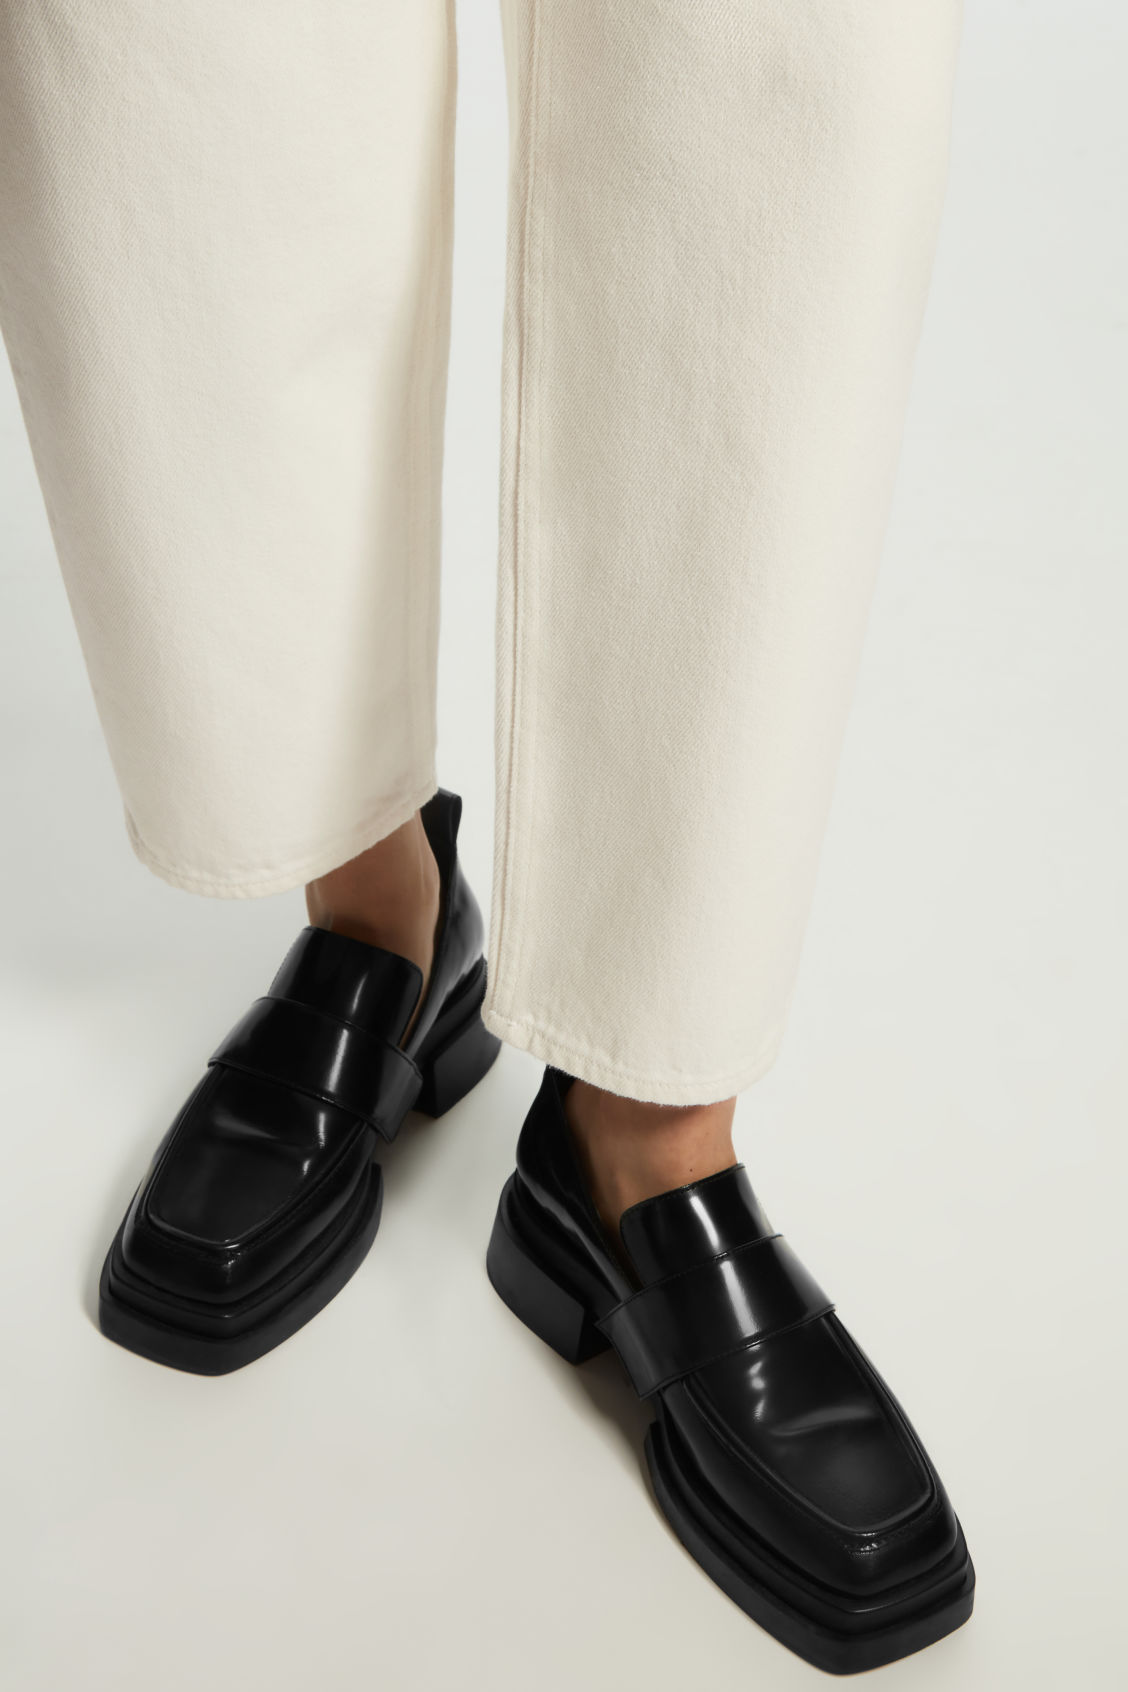 COS - Chunky Leather Loafers